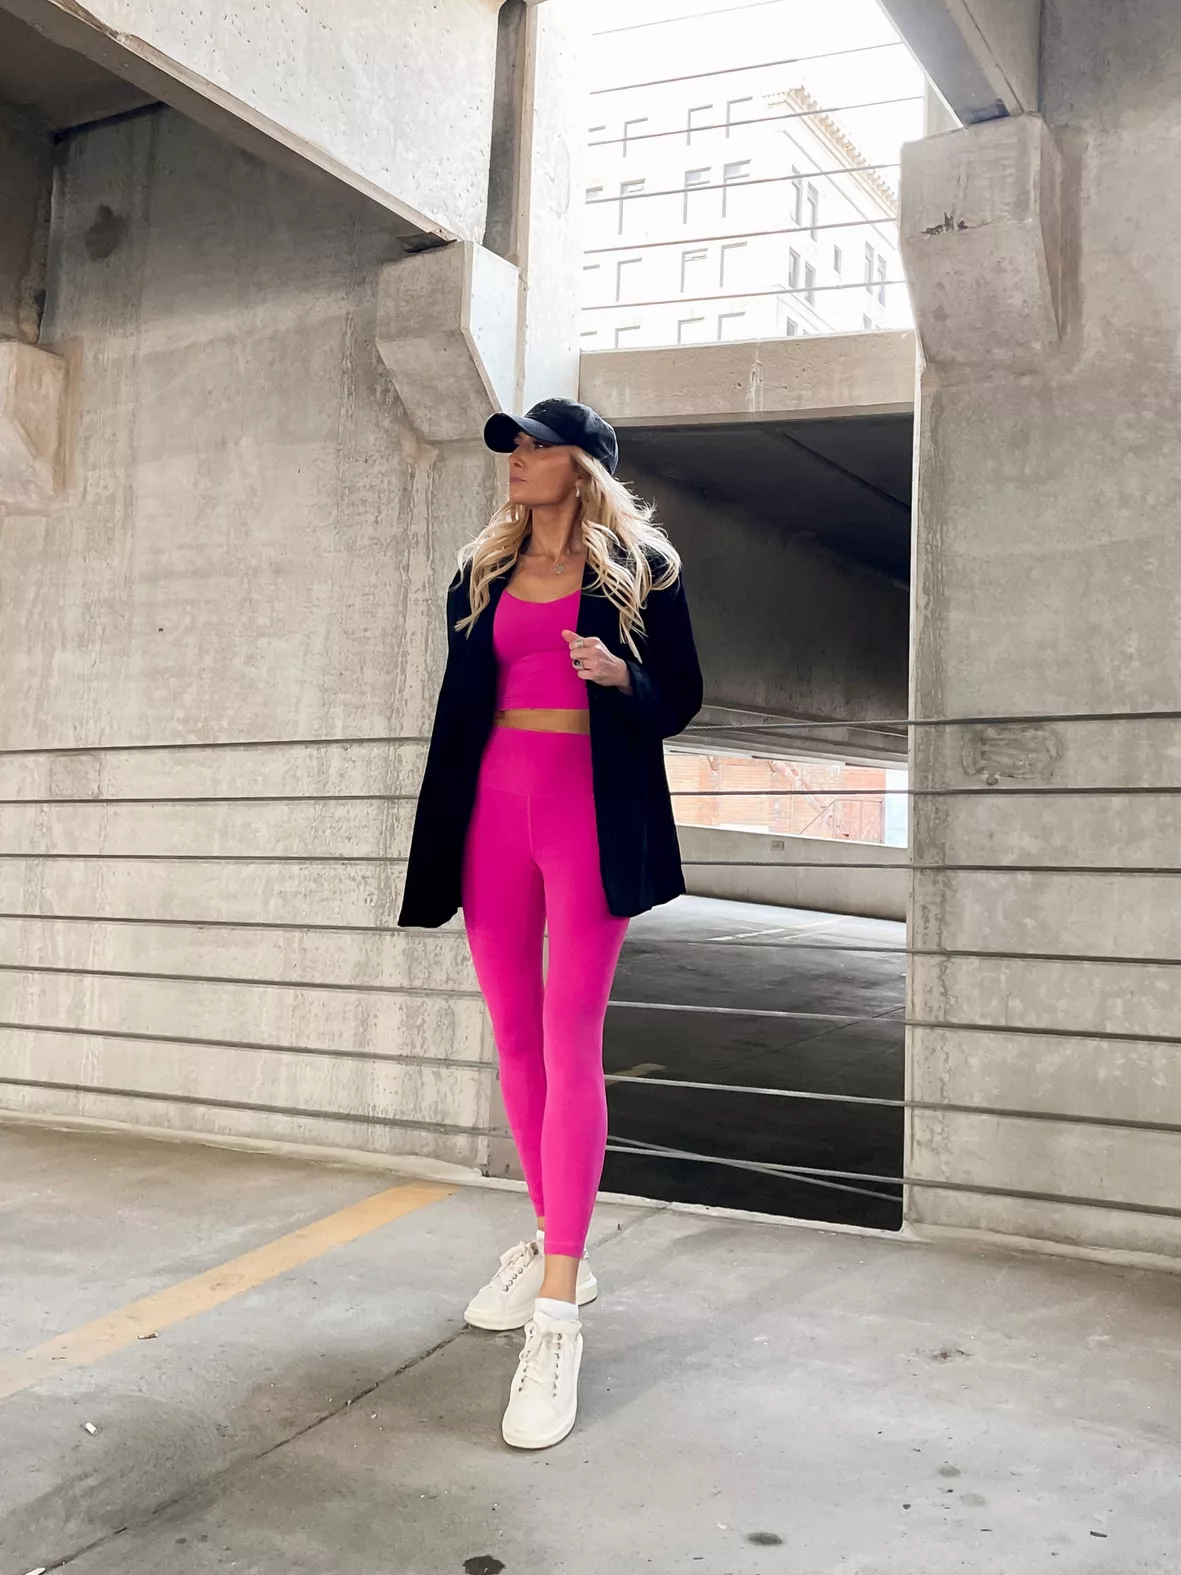 Black Tights with Hot Pink Blazer Outfits (2 ideas & outfits)